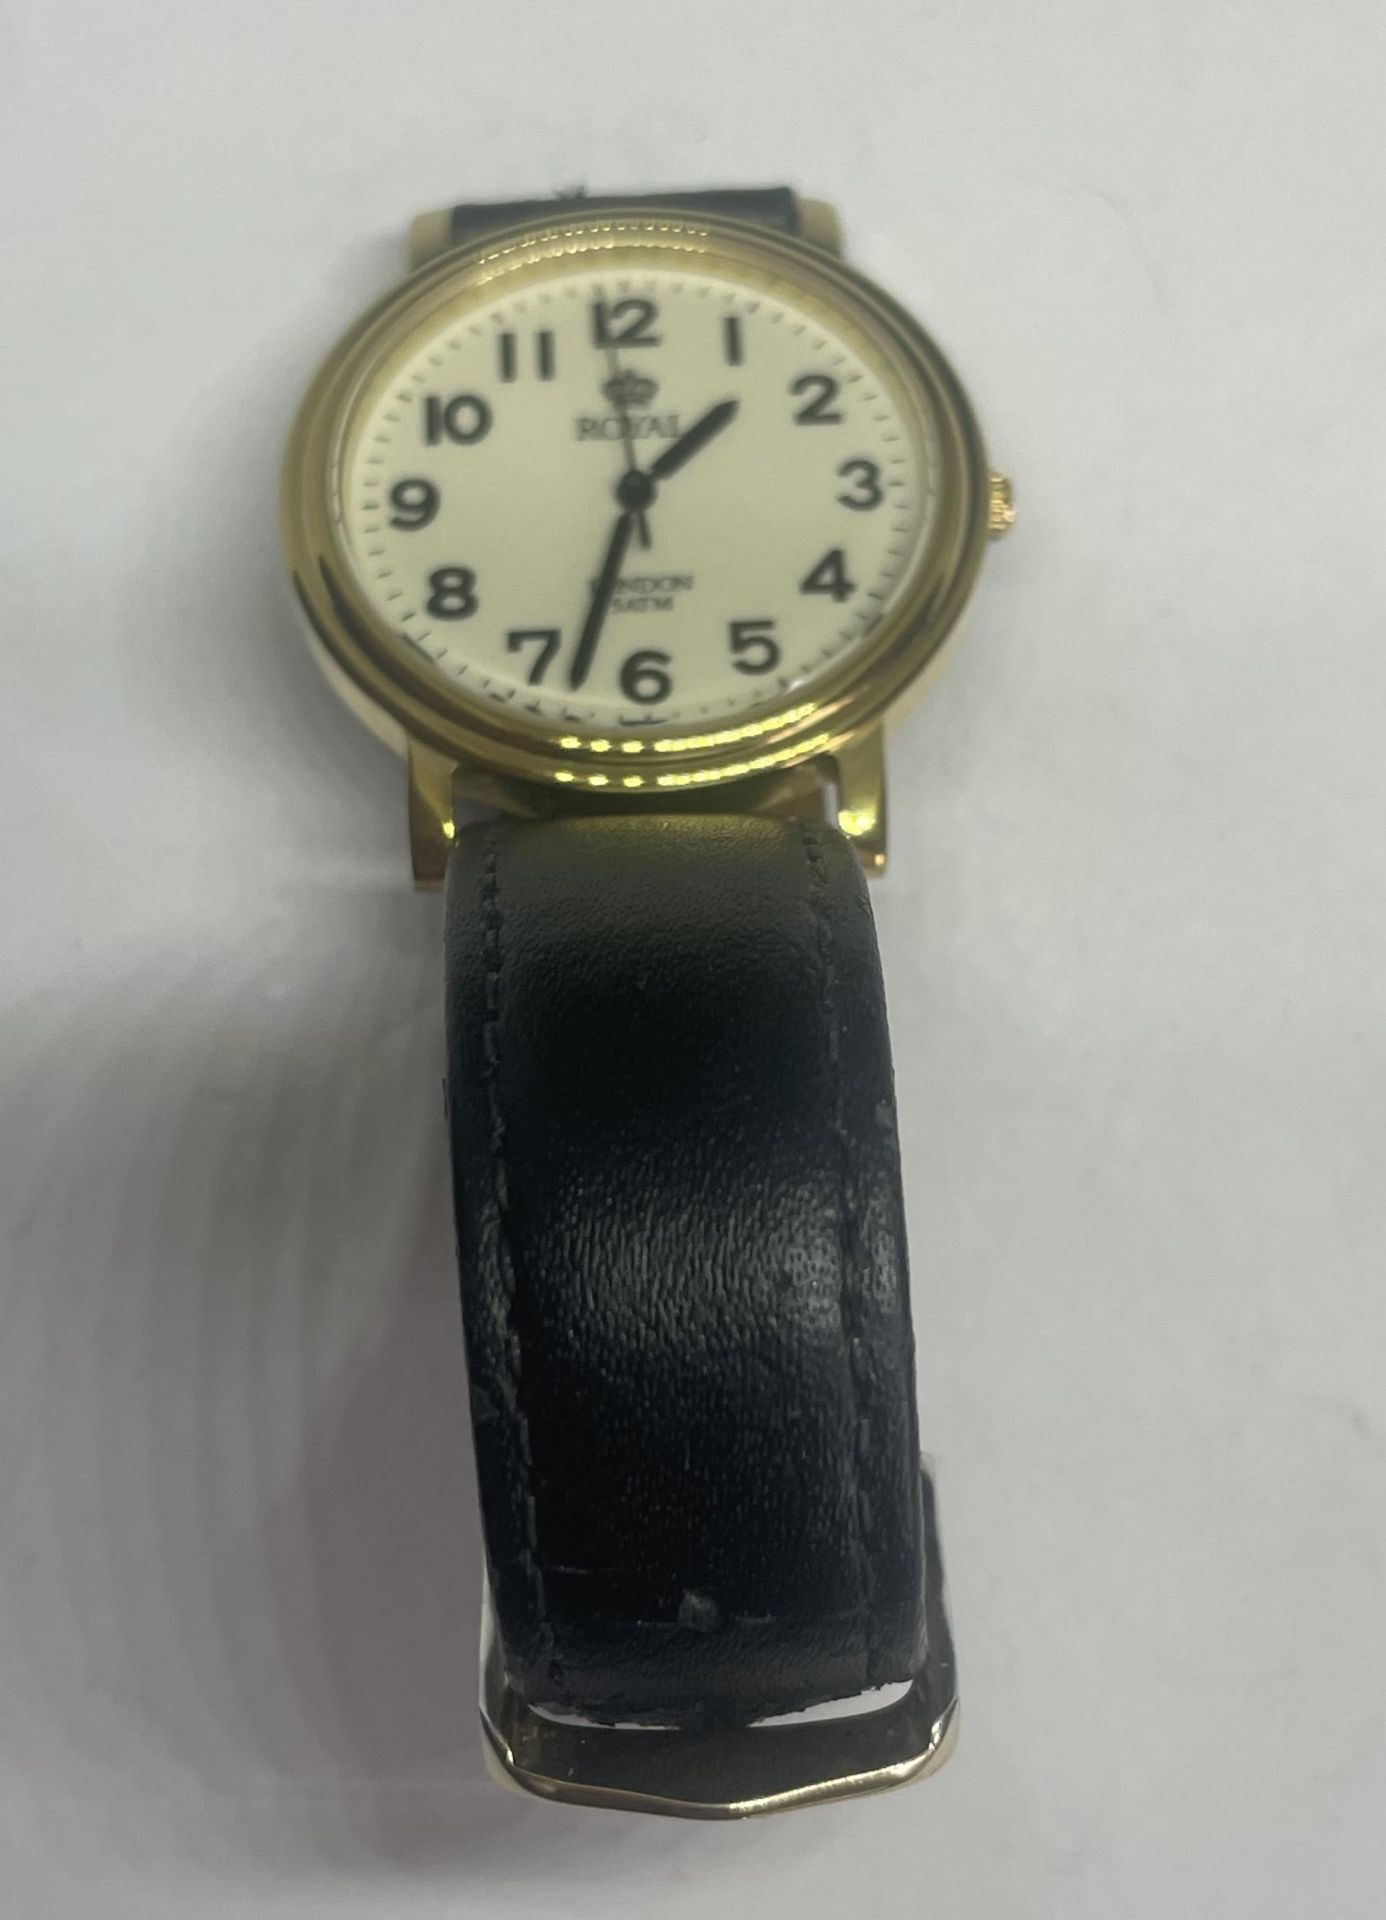 A ROYAL LONDON WRSIT WATCH WITH BLACK LEATHER STRAP SEEN WORKING BUT NO WARRANTY